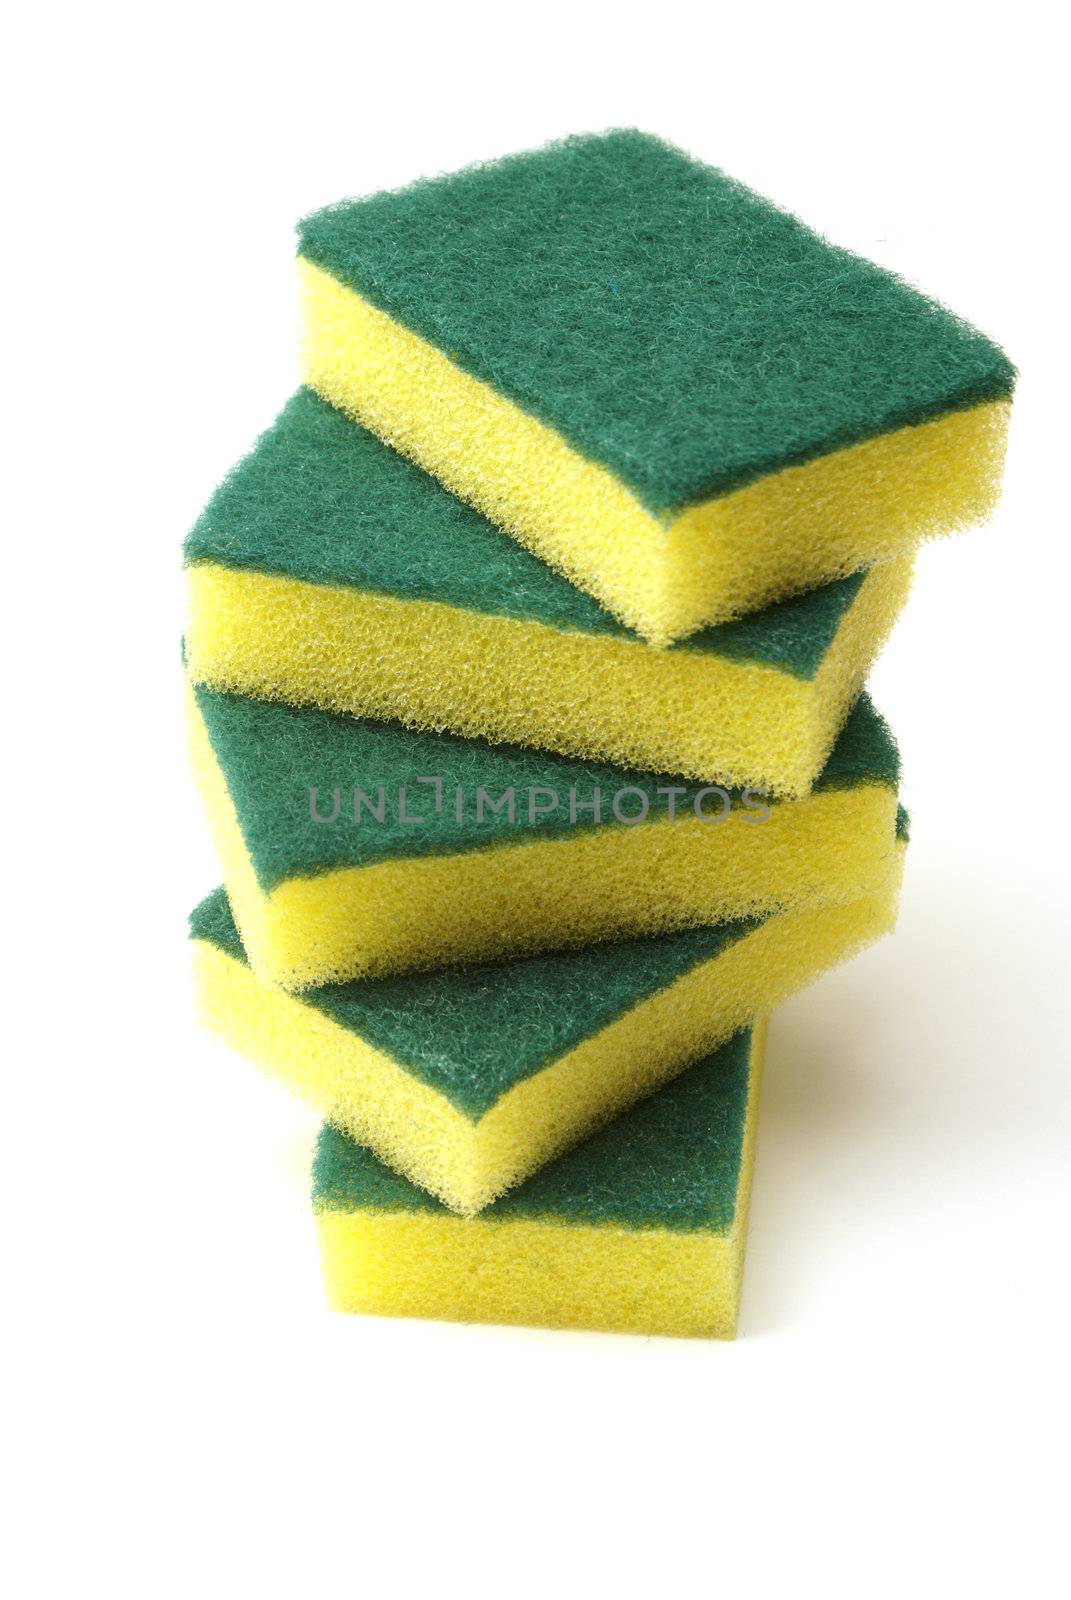 A stack of cleaning sponges with two scrubbing sides.